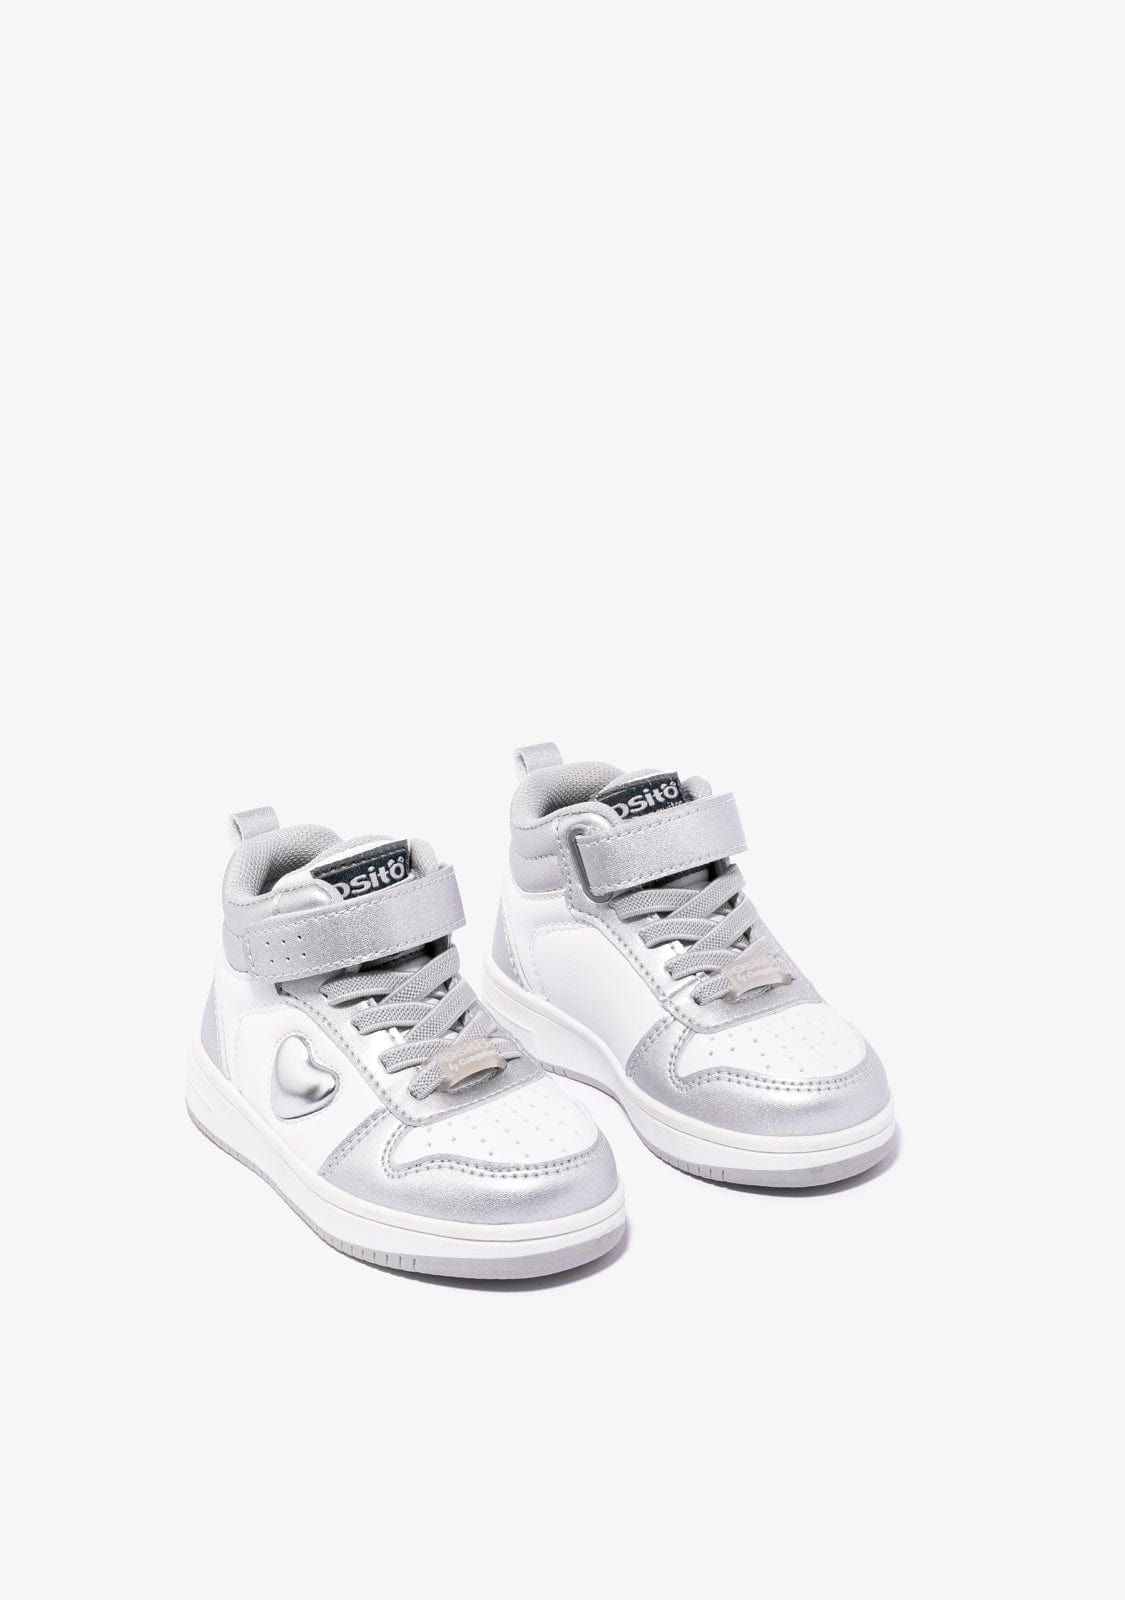 OSITO Shoes Baby's Silver / White With Lights Hi-Top Sneakers